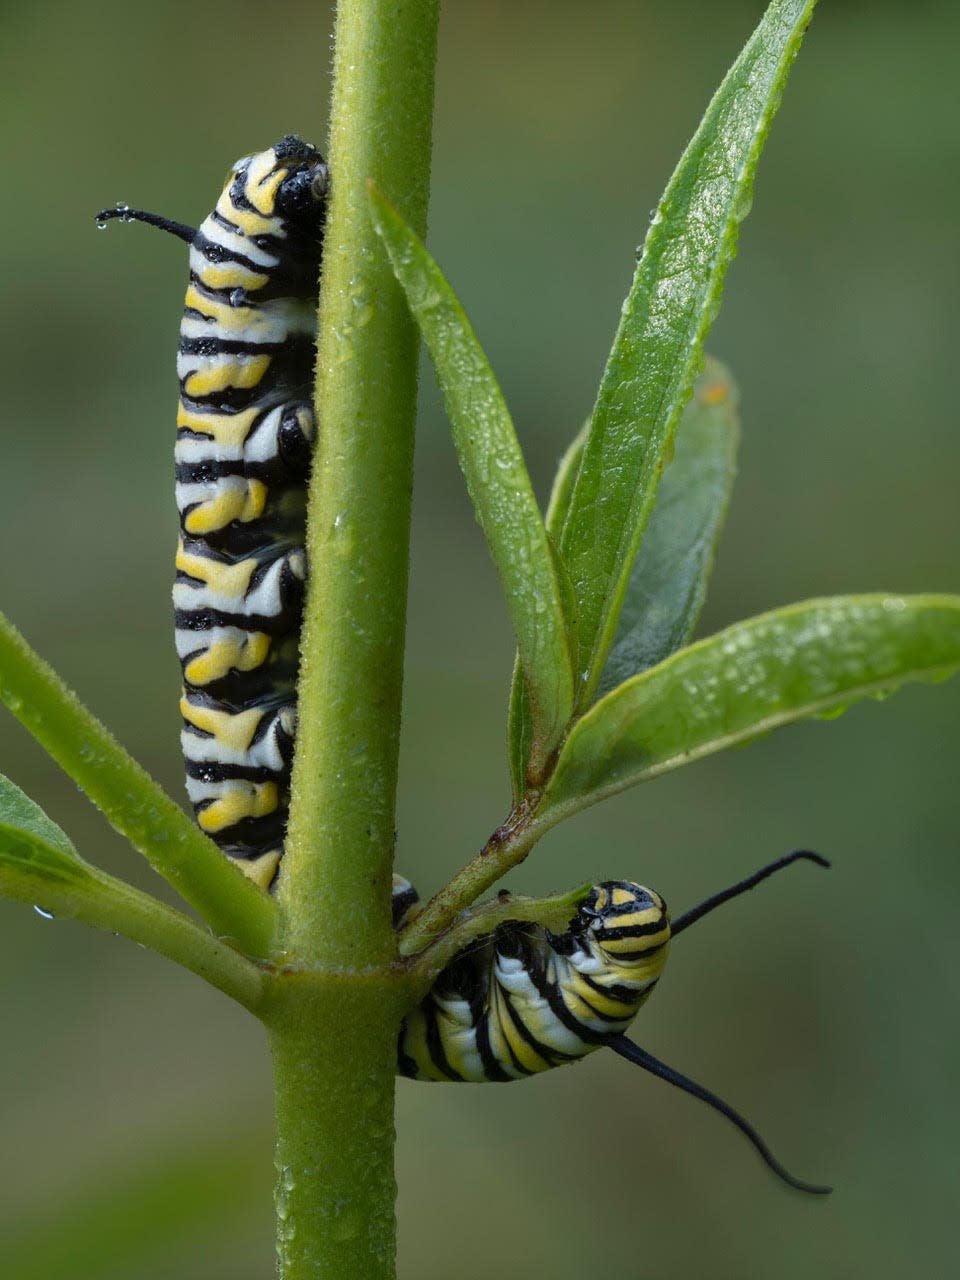 Two monarch caterpillars perched on a milkweed plant, which is vital to their life cycle.